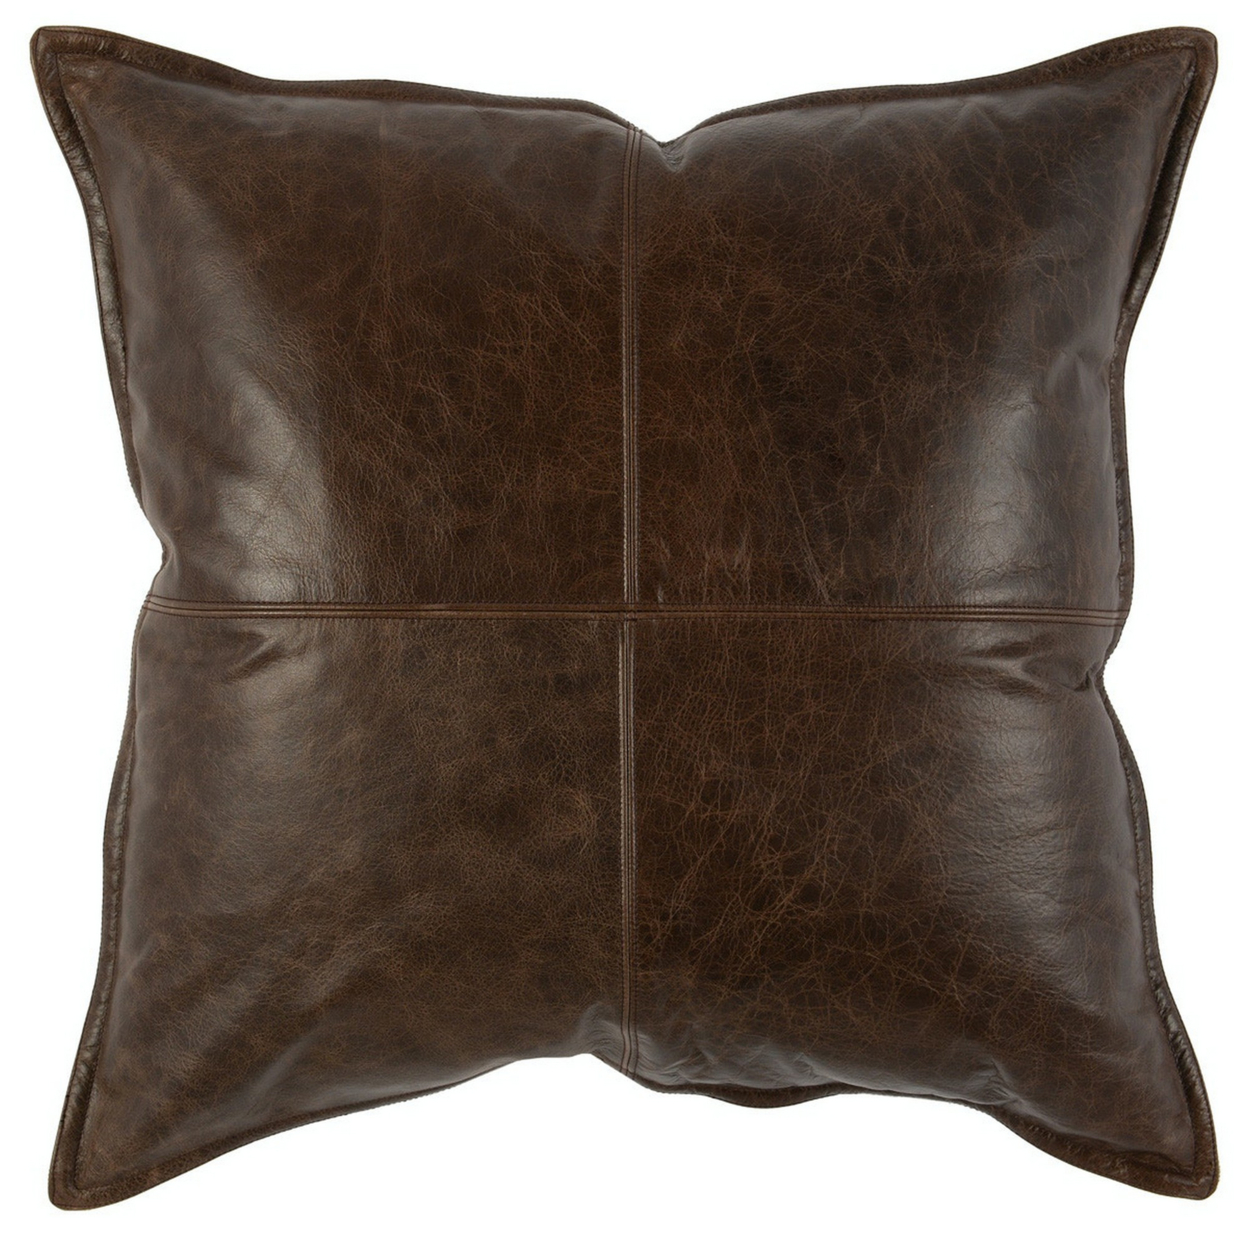 Square Leatherette Throw Pillow With Stitched Details, Dark Brown- Saltoro Sherpi